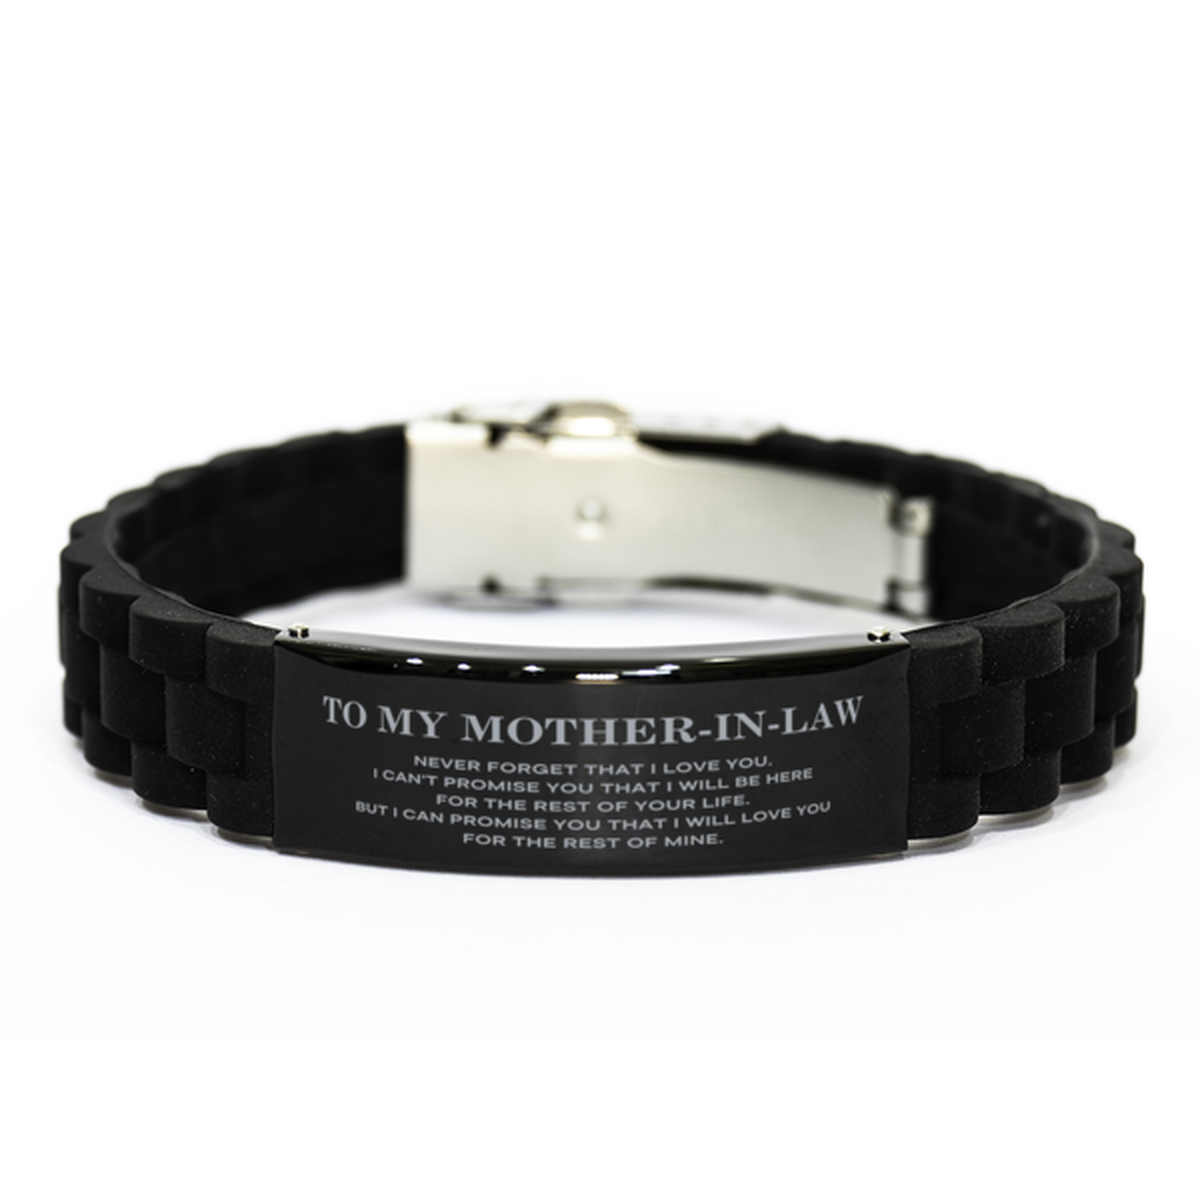 To My Mother-In-Law Gifts, I will love you for the rest of mine, Love Mother-In-Law Bracelet, Birthday Christmas Unique Black Glidelock Clasp Bracelet For Mother-In-Law